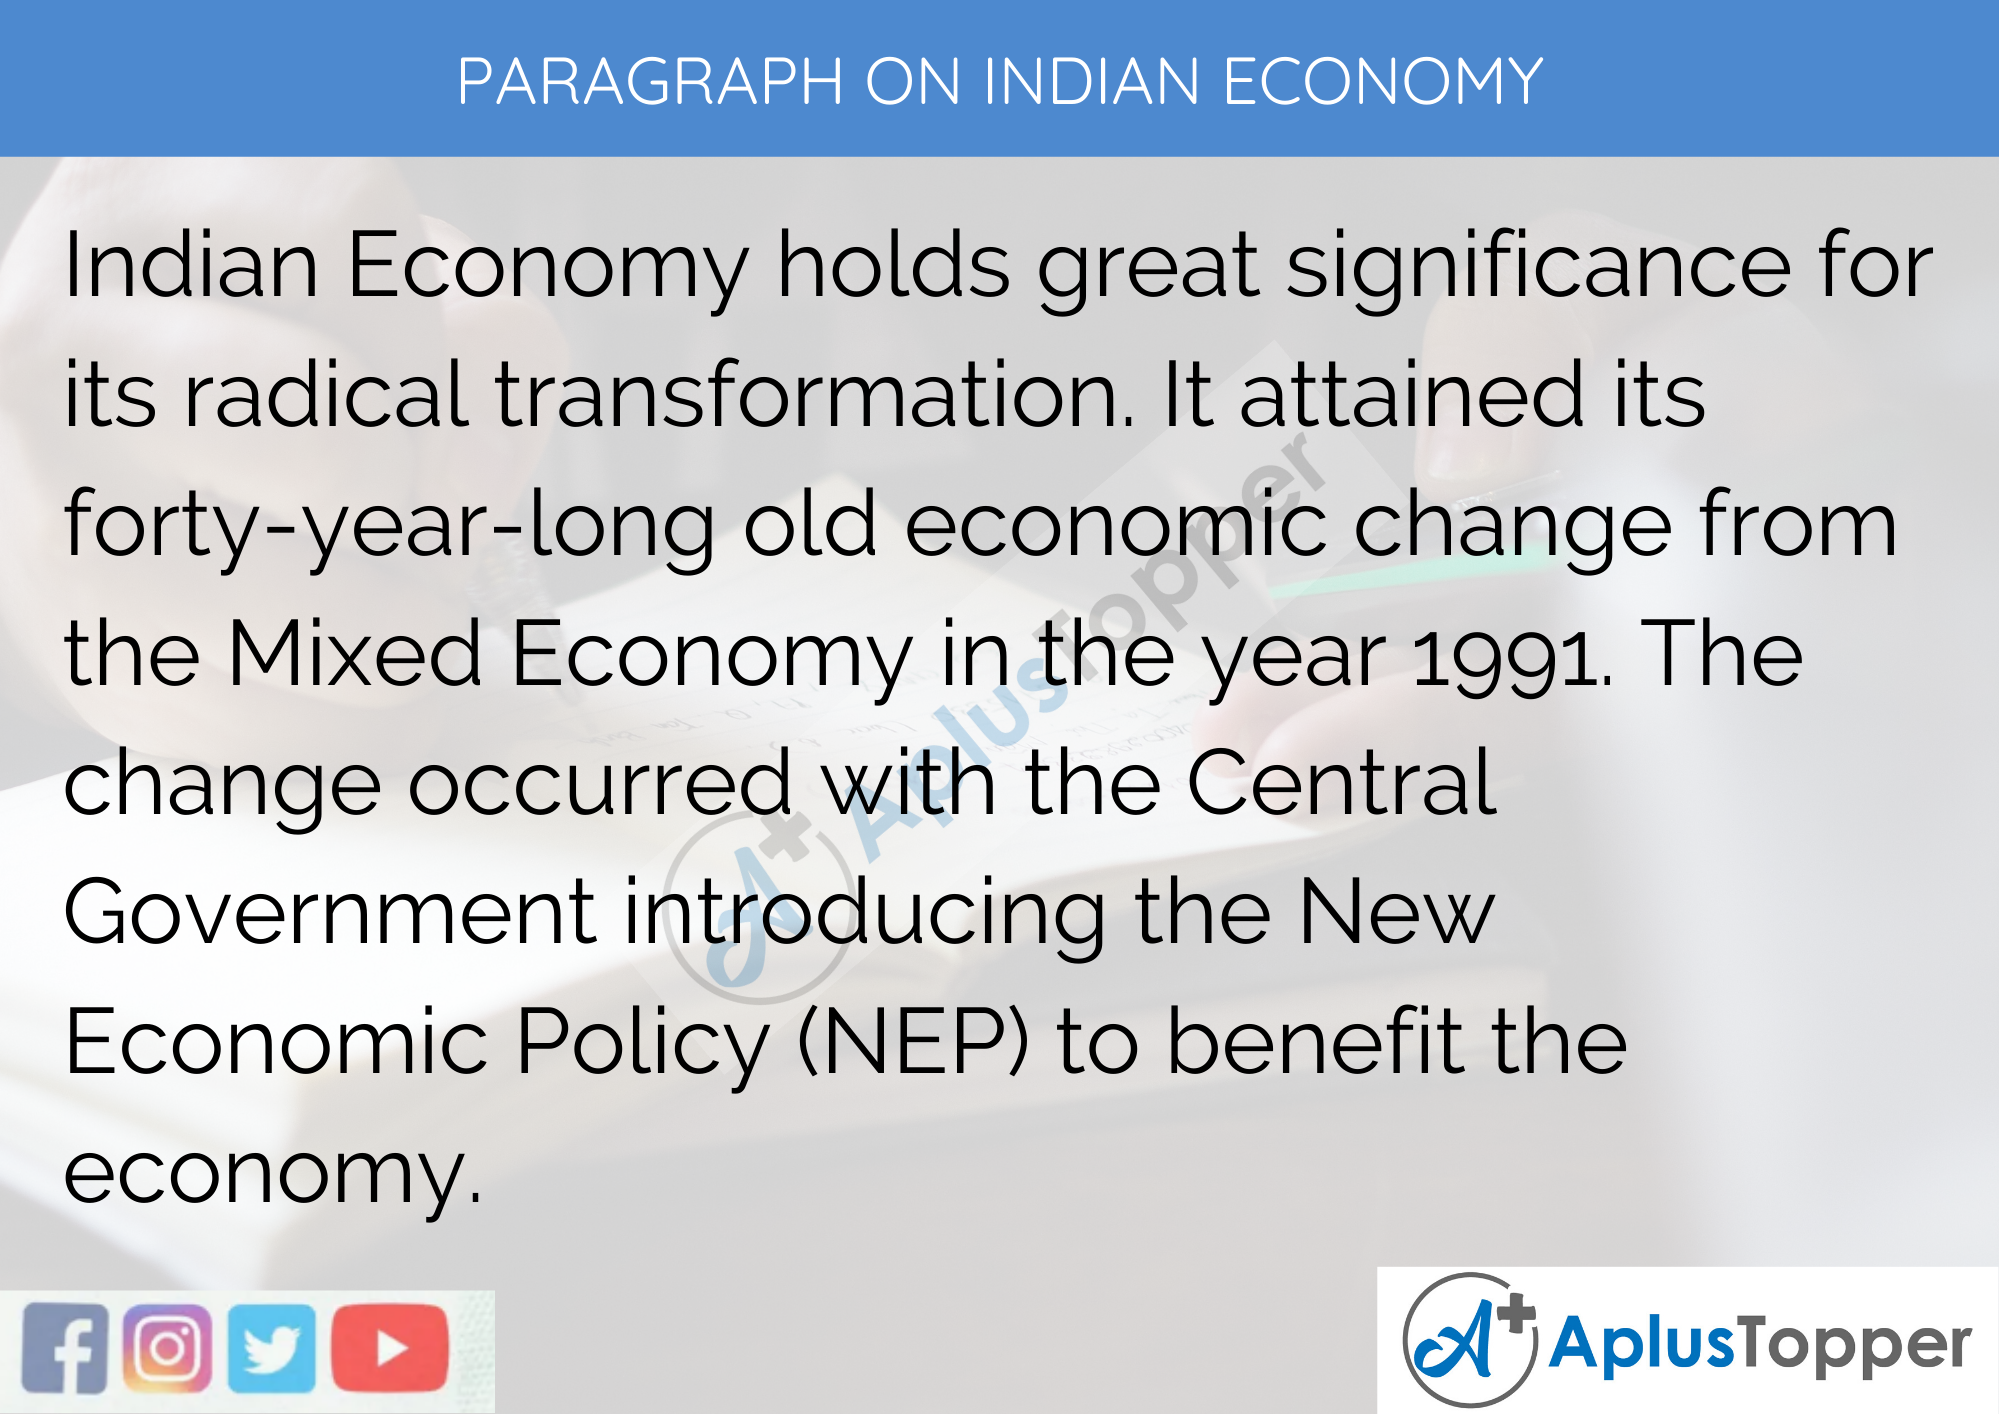 Paragraph on Indian Economy - 250 to 300 Words for Classes 9, 10, 11, and 12, And Competitive Exam Aspirants